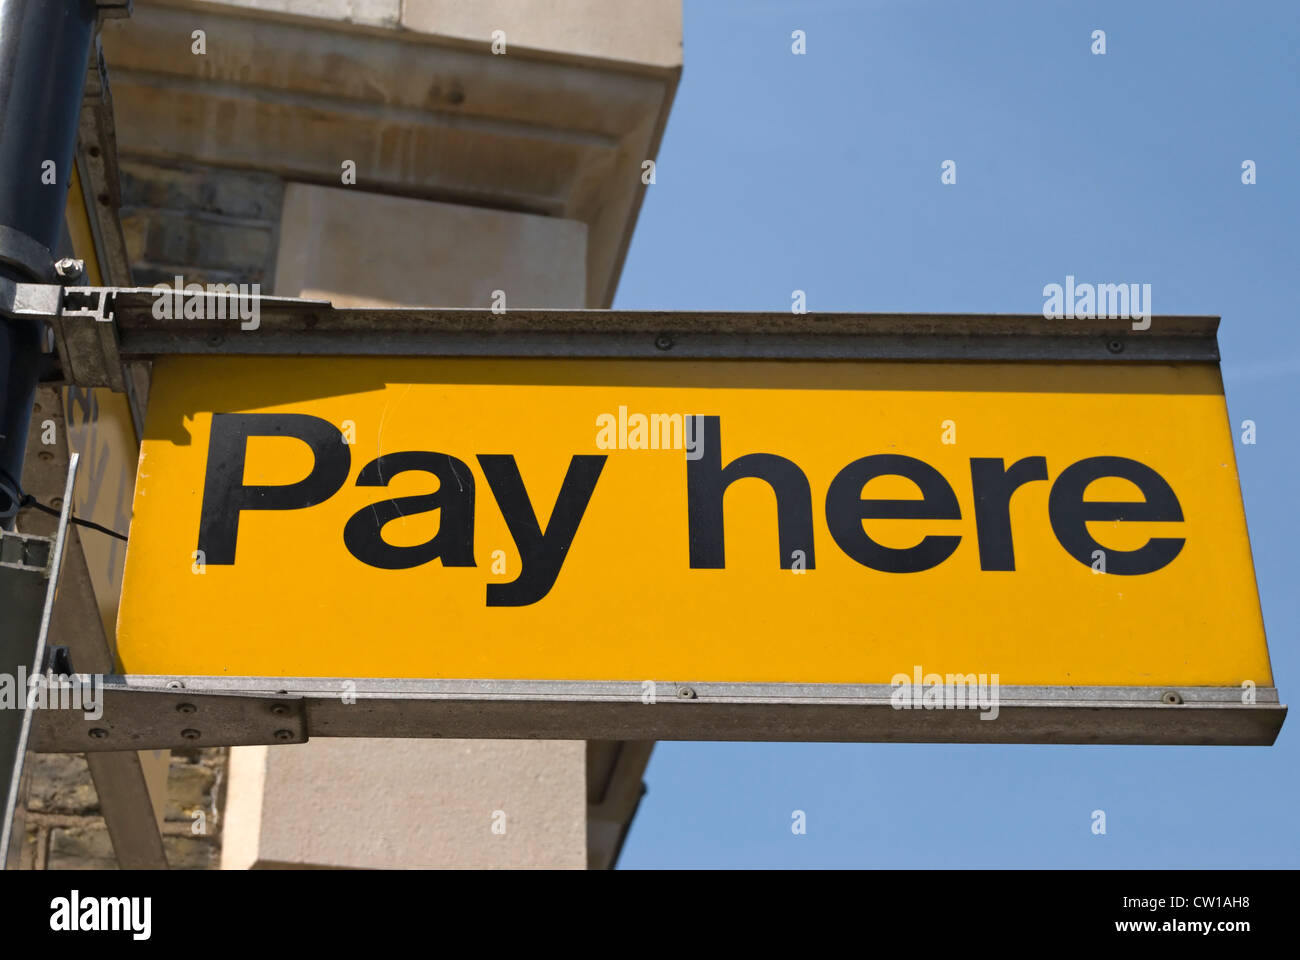 pay here sign at a car park in chiswick, london, england Stock Photo